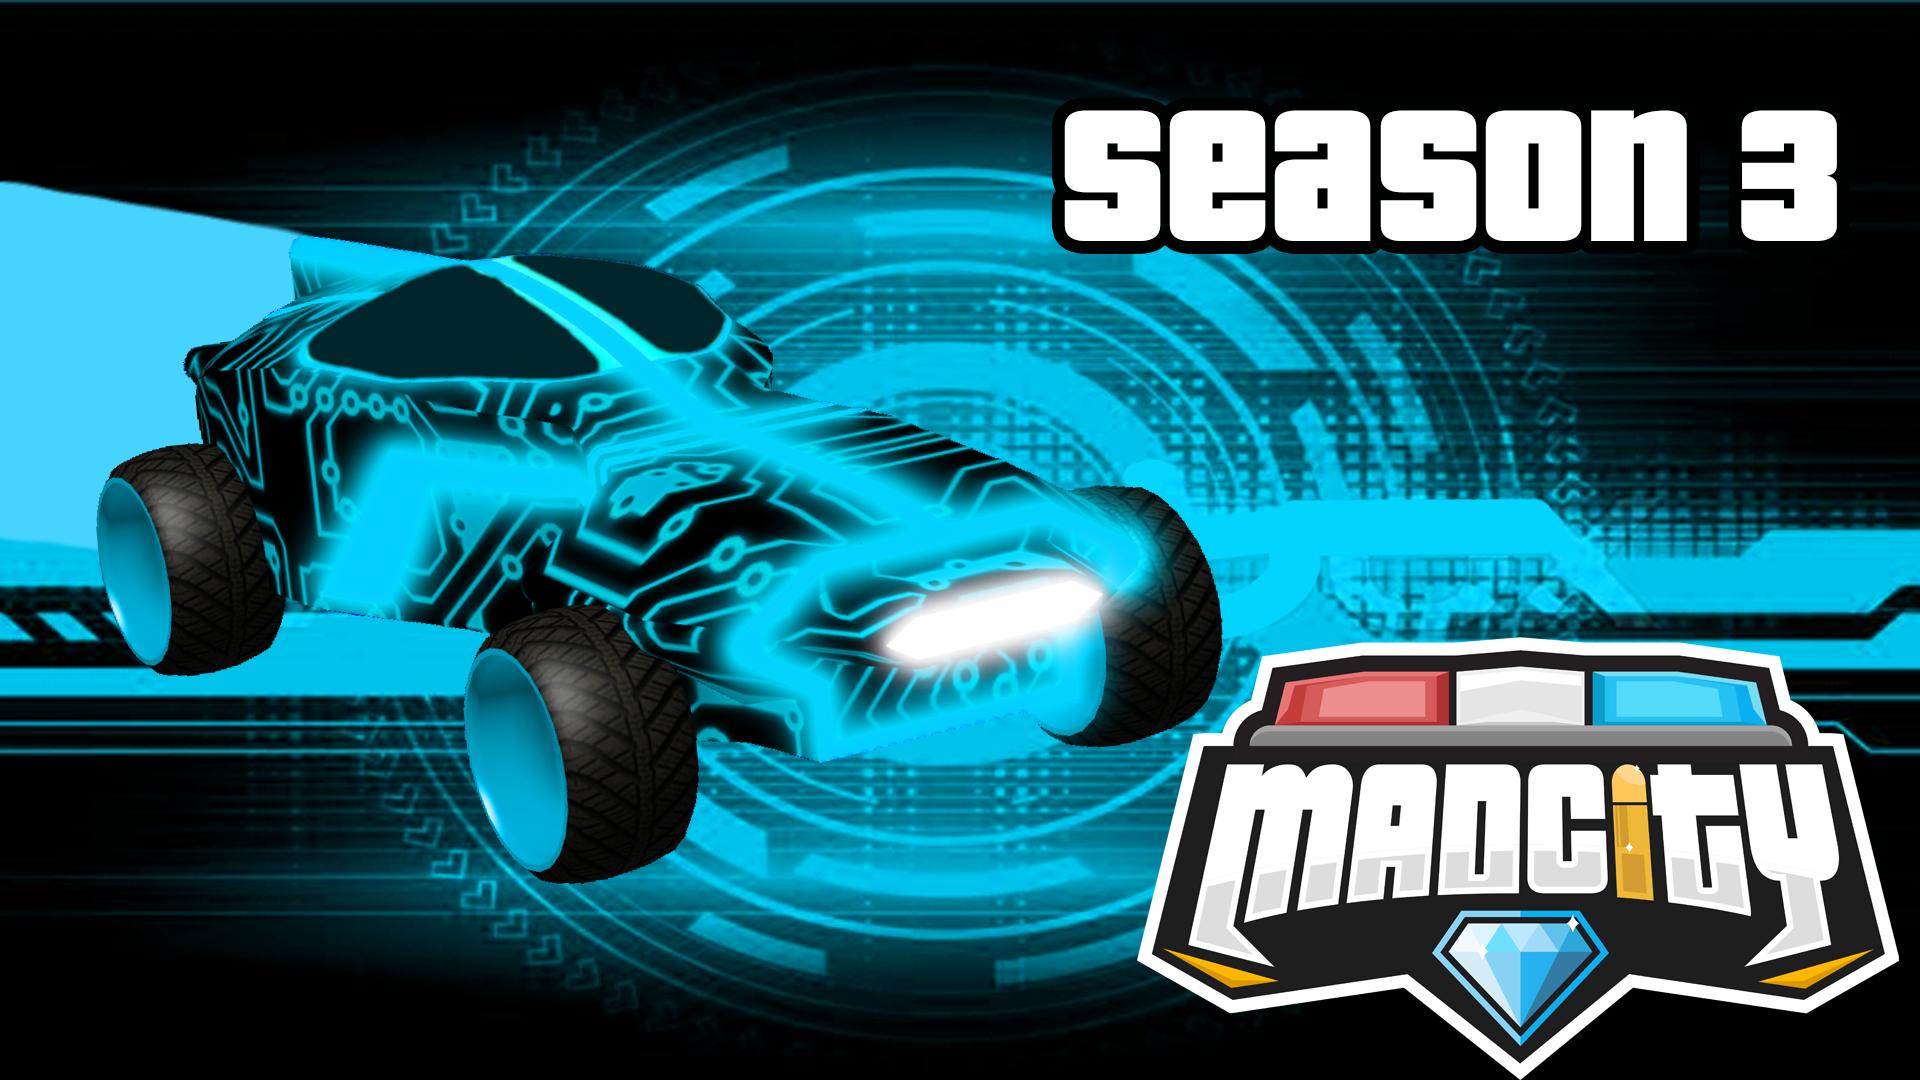 Taylor Sterling On Twitter Season 3 Is Finally Here With 20 Brand New Rewards To Unlock Use Code S34z4n3 To Unlock The Plasma Skin Https T Co Oik2rmqka3 Https T Co Irwoqjq0gn - all codes for mad city roblox 2019 list